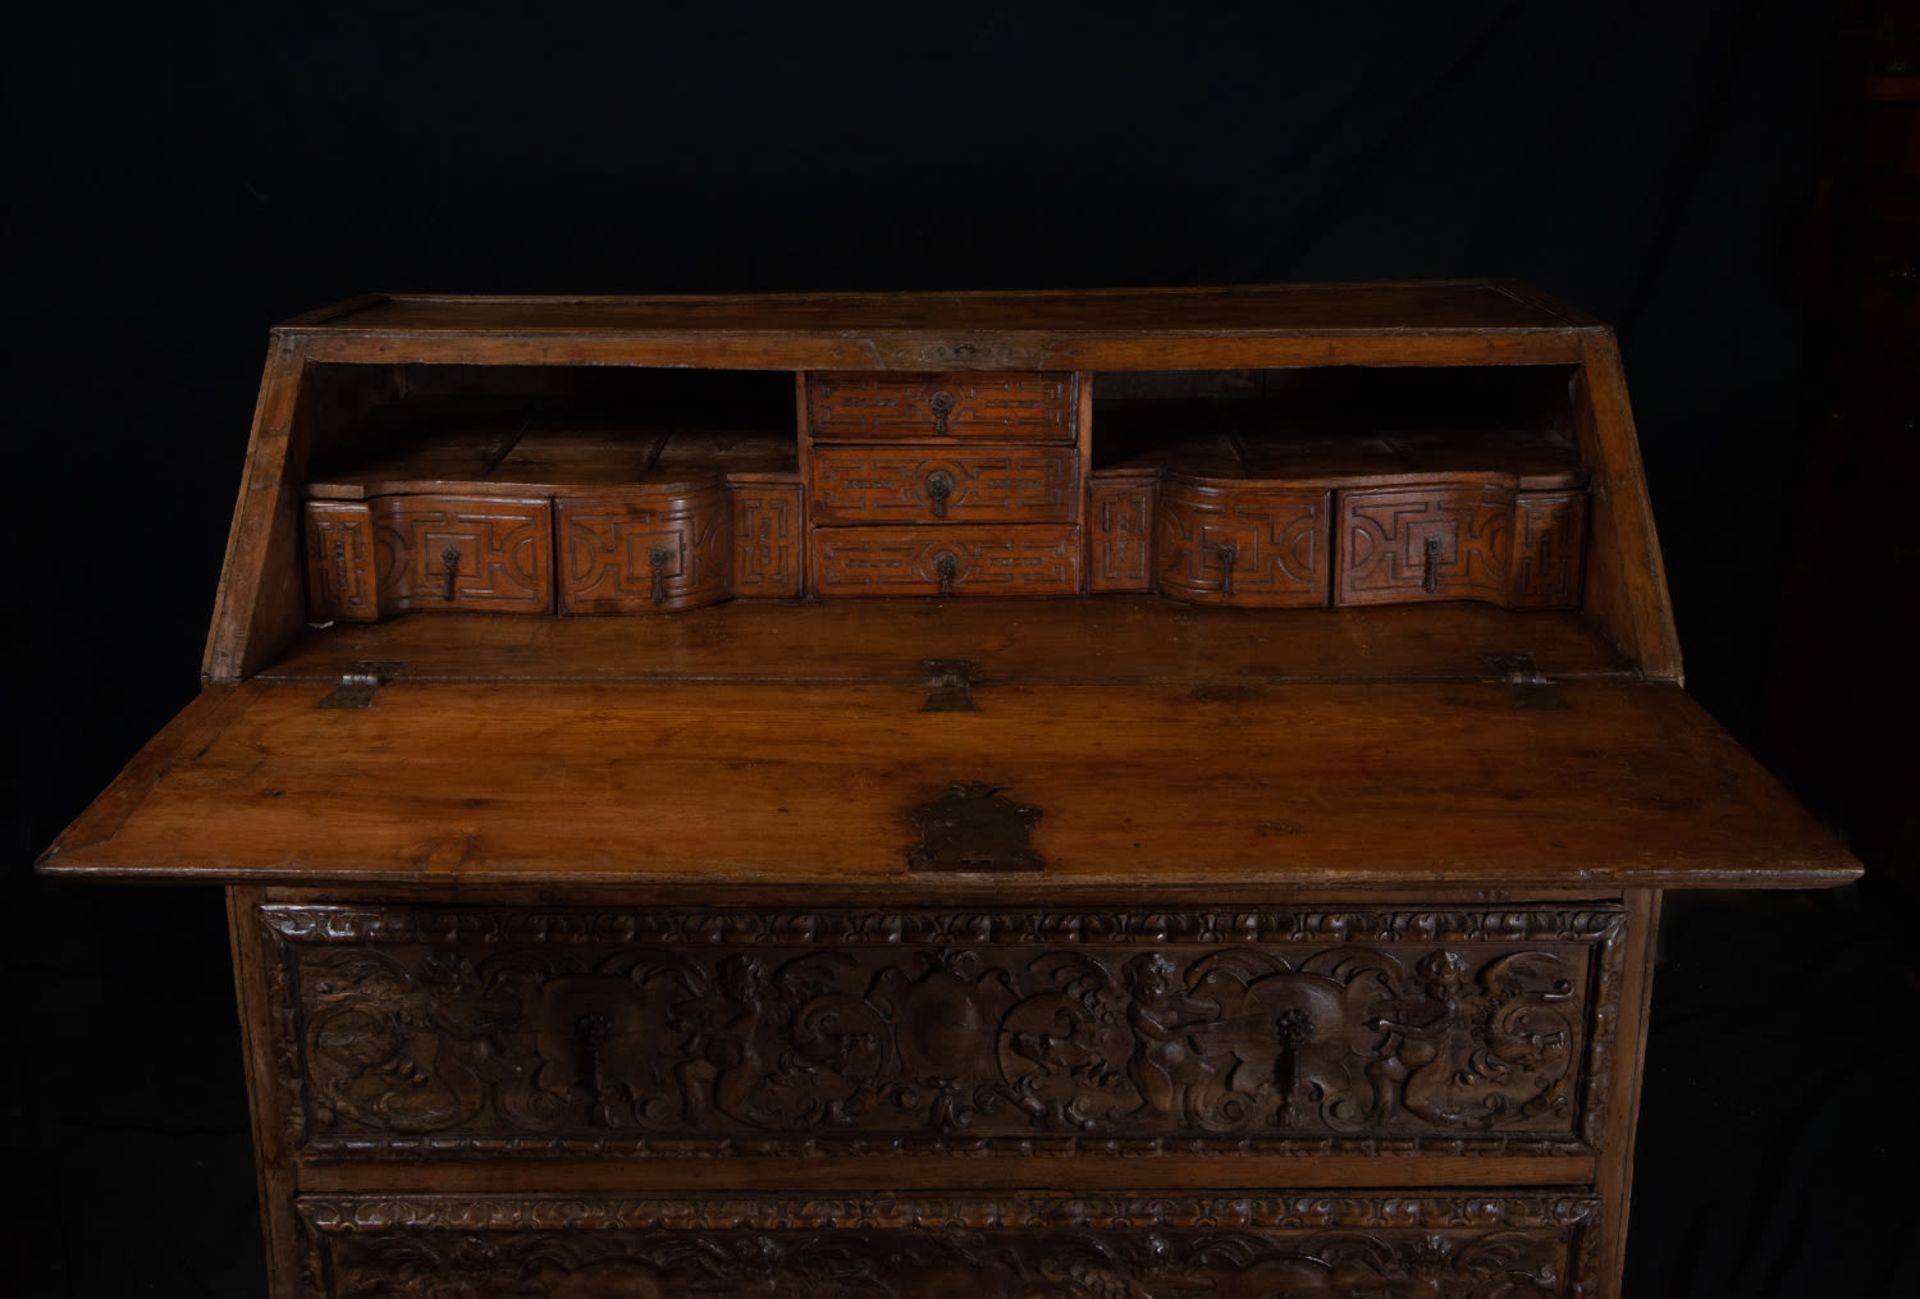 Exceptional Plateresque Desk Cabinet, Spanish Renaissance school of the 16th century - Image 6 of 9